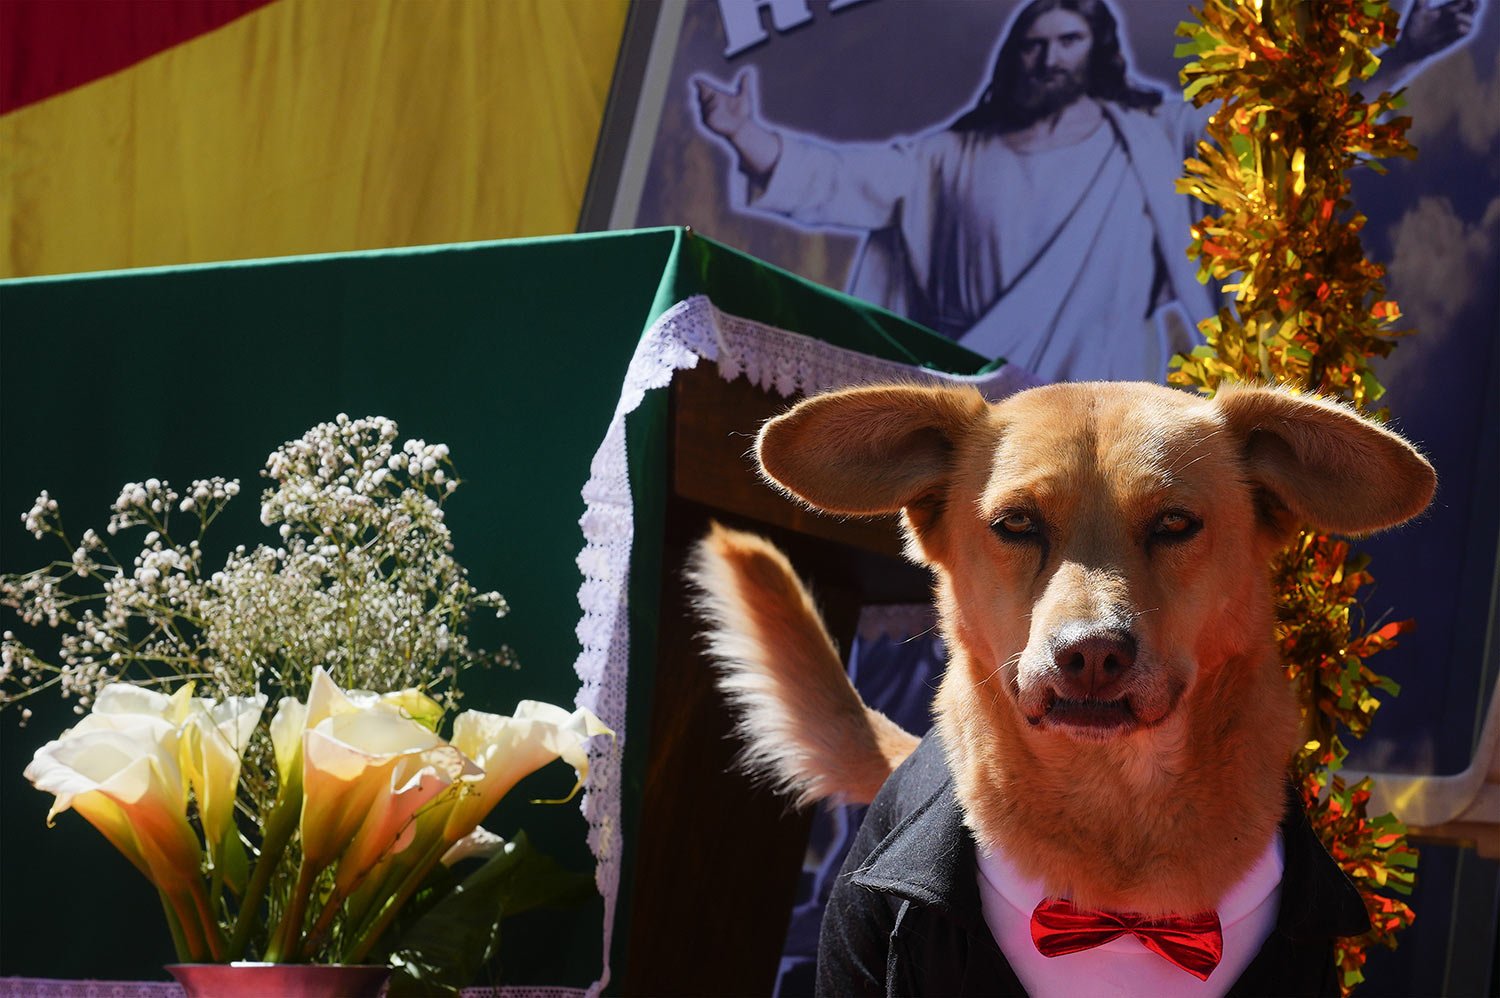  A dog dressed in a tuxedo attends a Mass at the Body of Christ church during celebrations marking the feast day of Saint Roch, recognized as the patron saint of dogs, in El Alto, Bolivia, Aug. 16, 2023. (AP Photo/Juan Karita) 